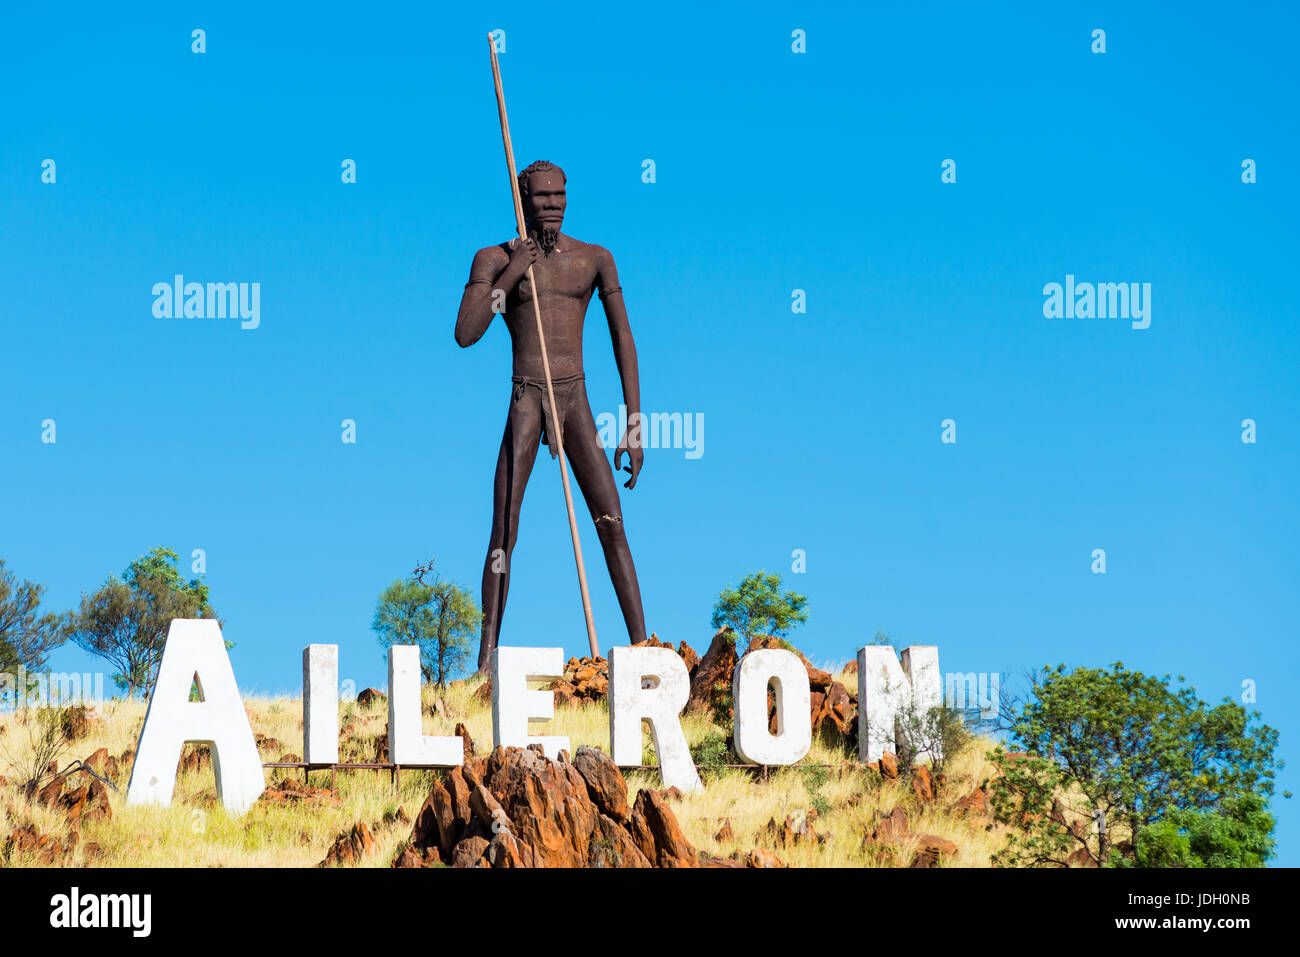 Huge iron sculpture of an aboriginal man at Aileron off the Stuart Highway north of Alice Springs, Northern Territory, Australia. Stock Photo